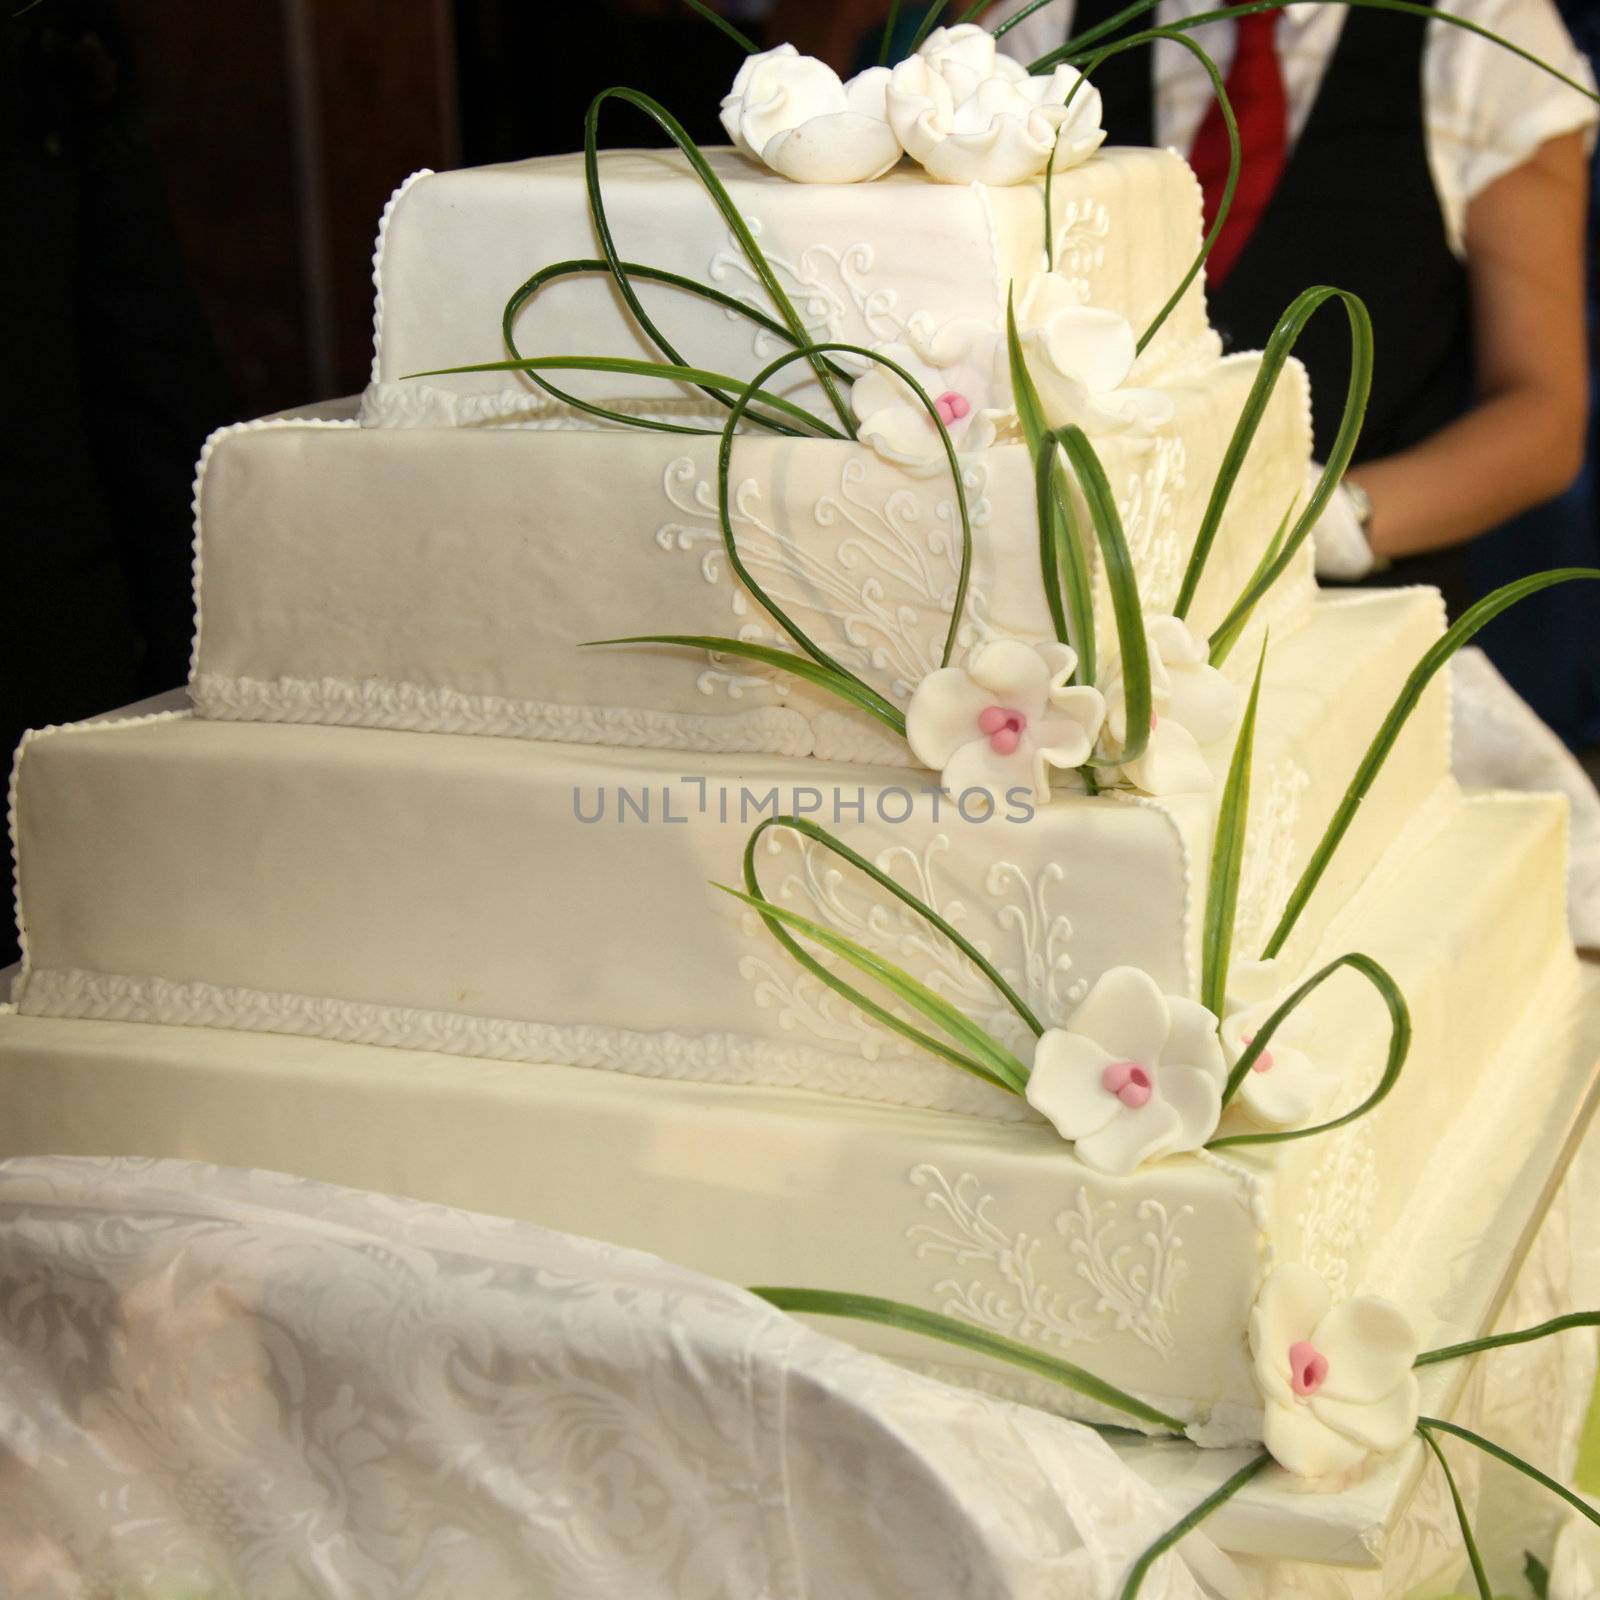 Huge, four-tiered wedding cake or birthday cake with rose decoration - English style - with a waiter in the background